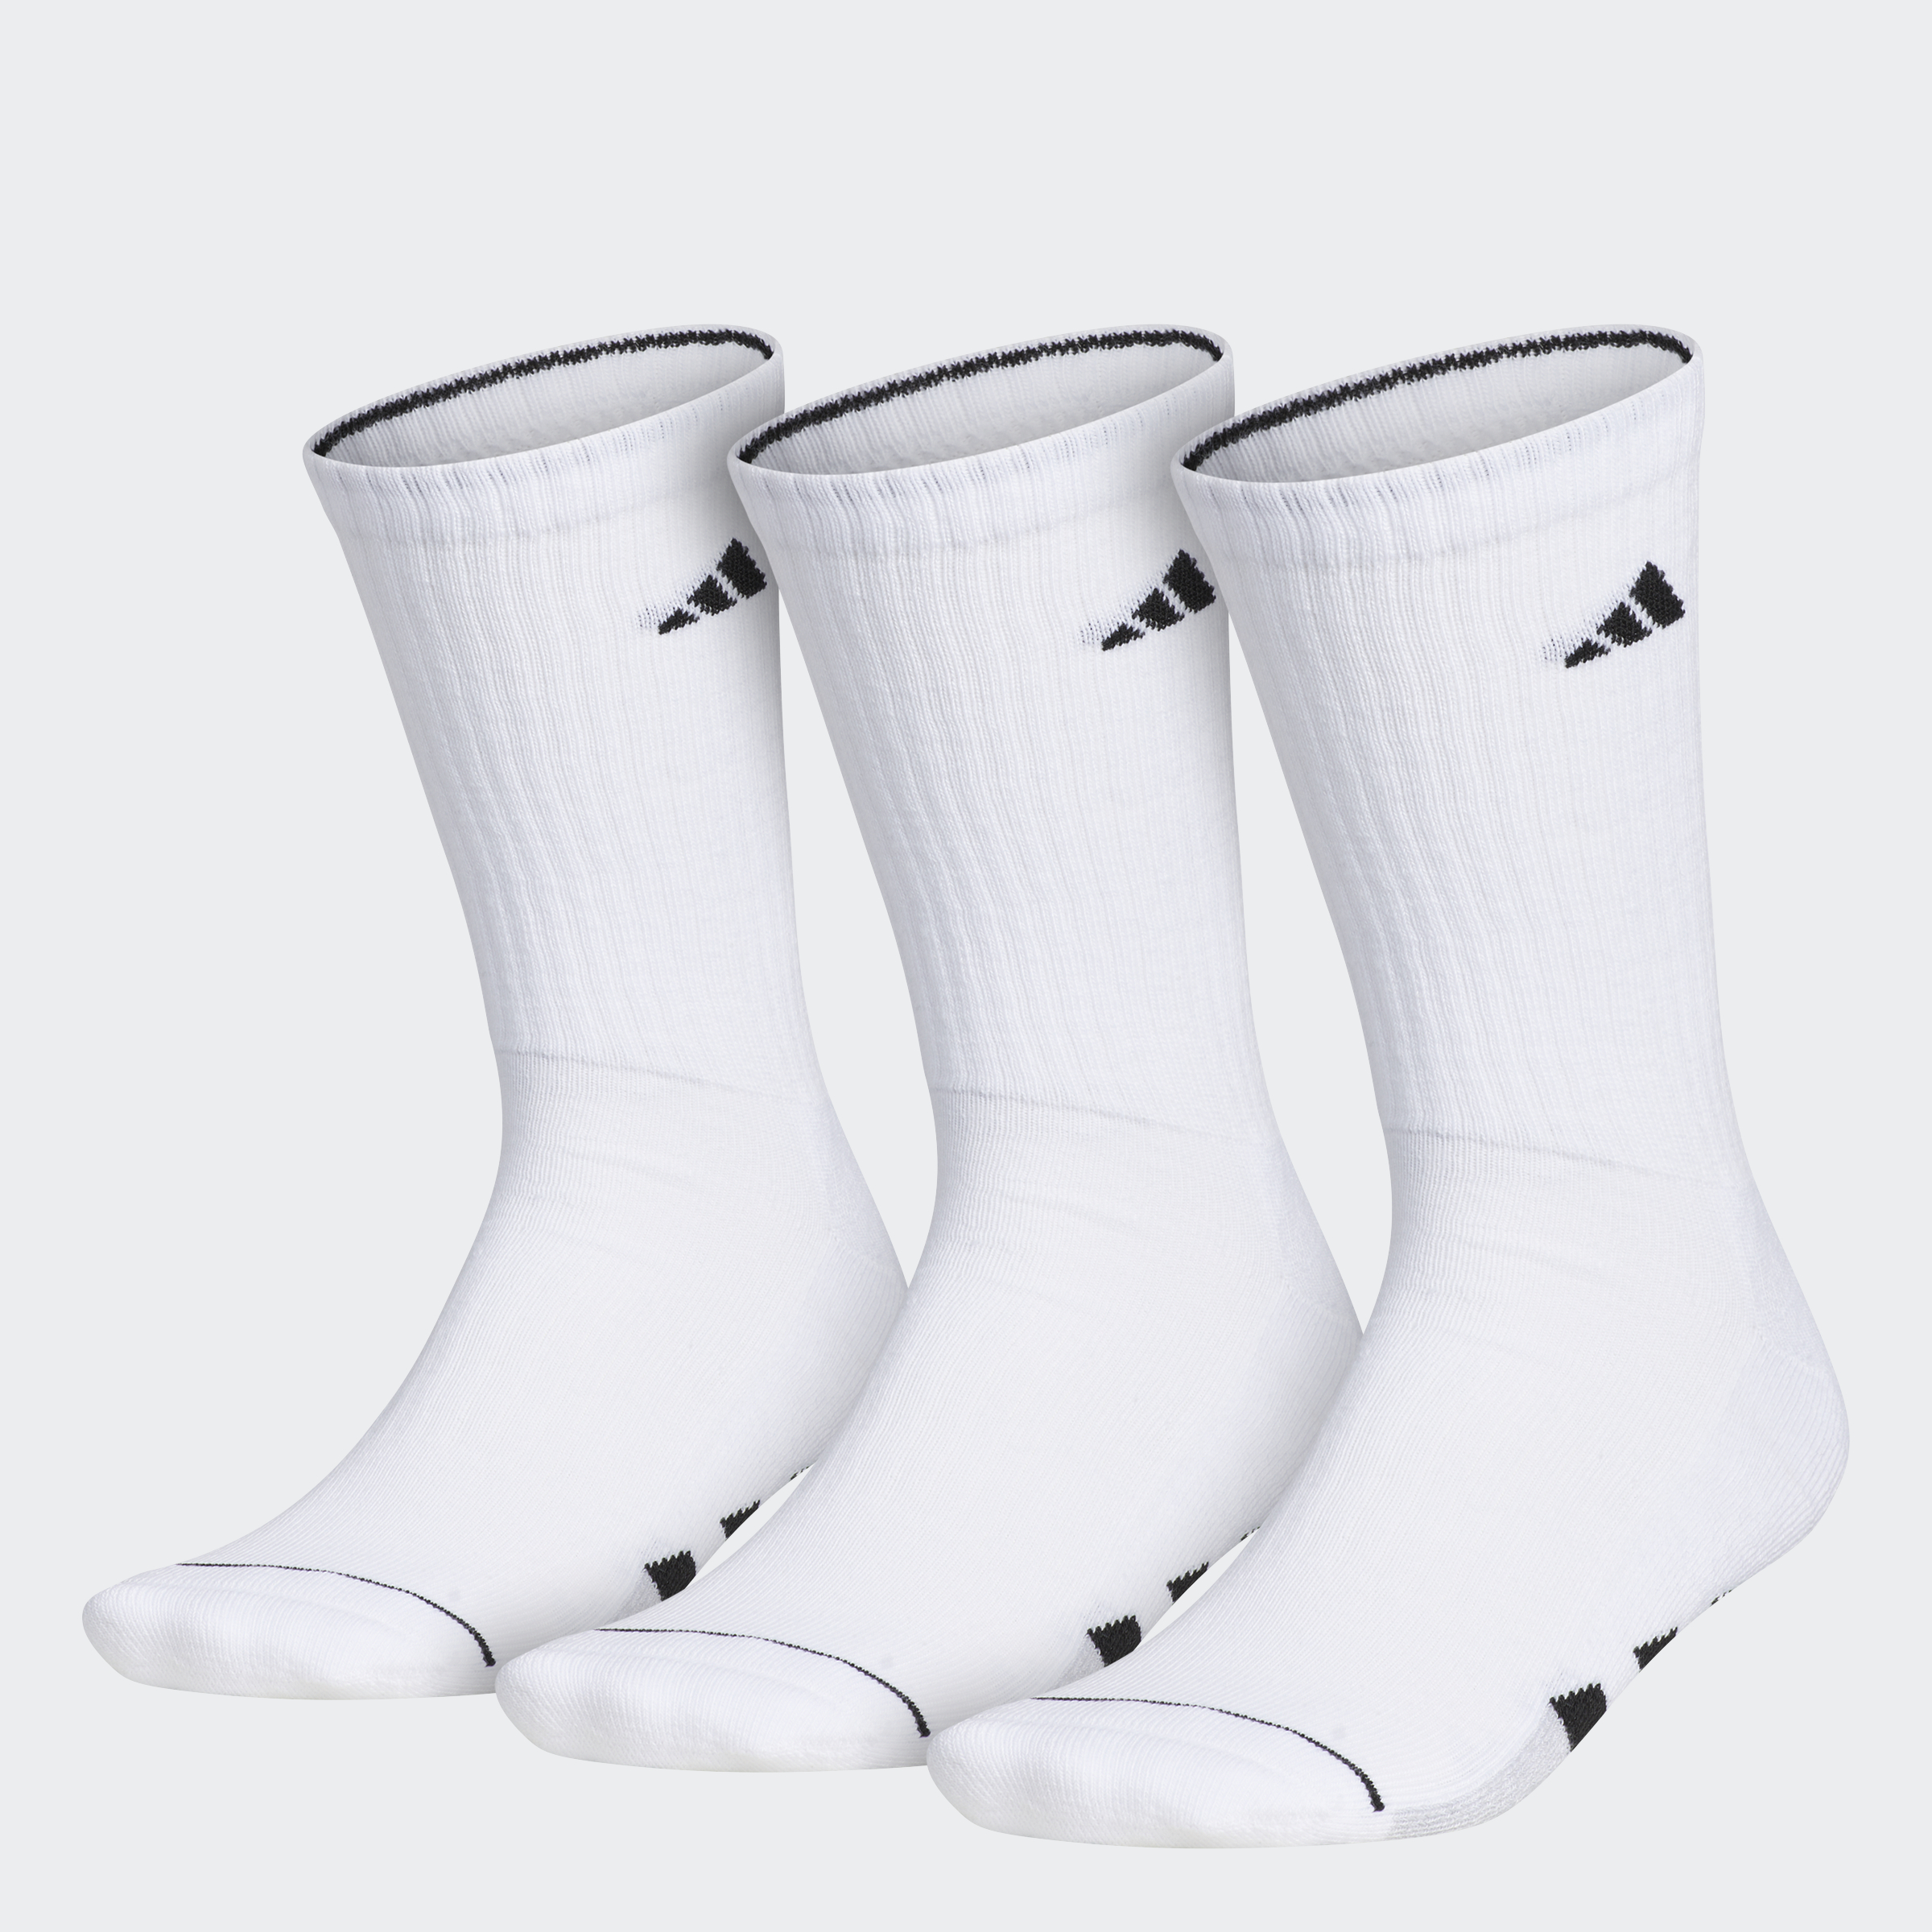 3-Pairs adidas Men's Cushioned Crew Socks (XL Only, White) $3.50 + Free Shipping